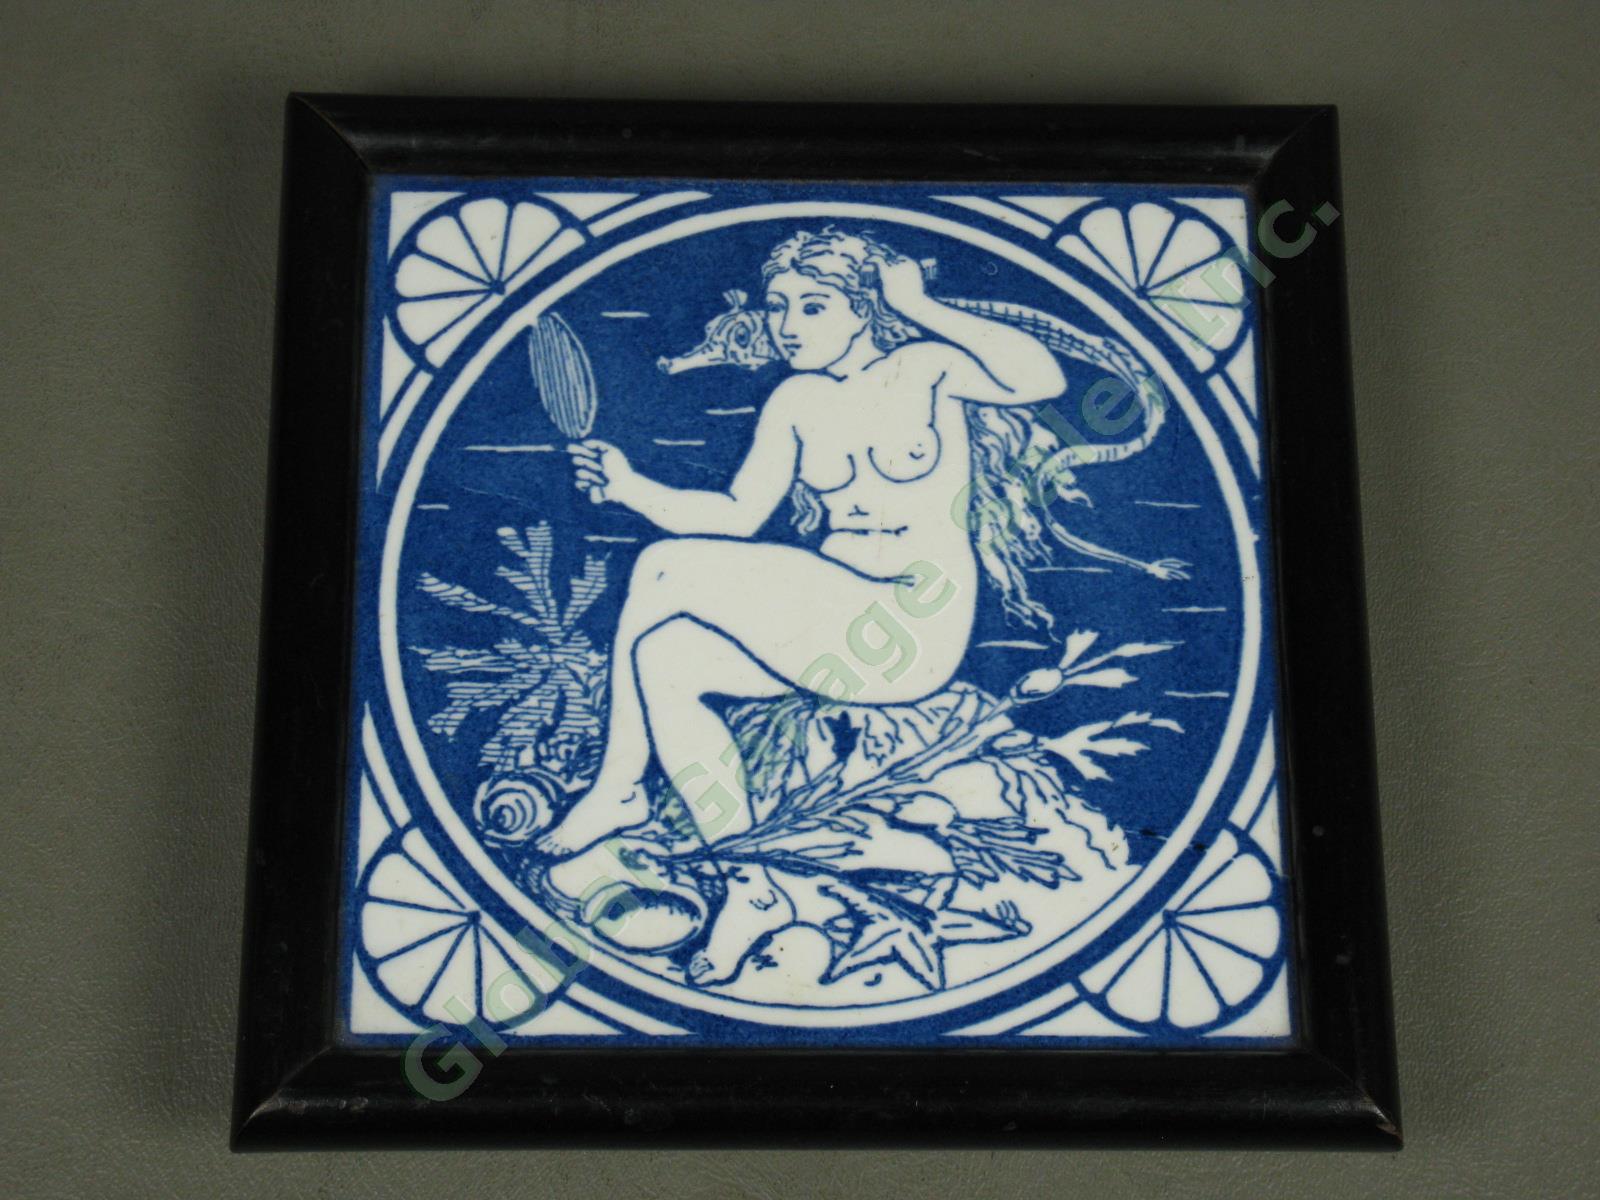 Antique 1800s Mintons China Works Stoke On Trent Ceramic Pottery Tile Nude Woman